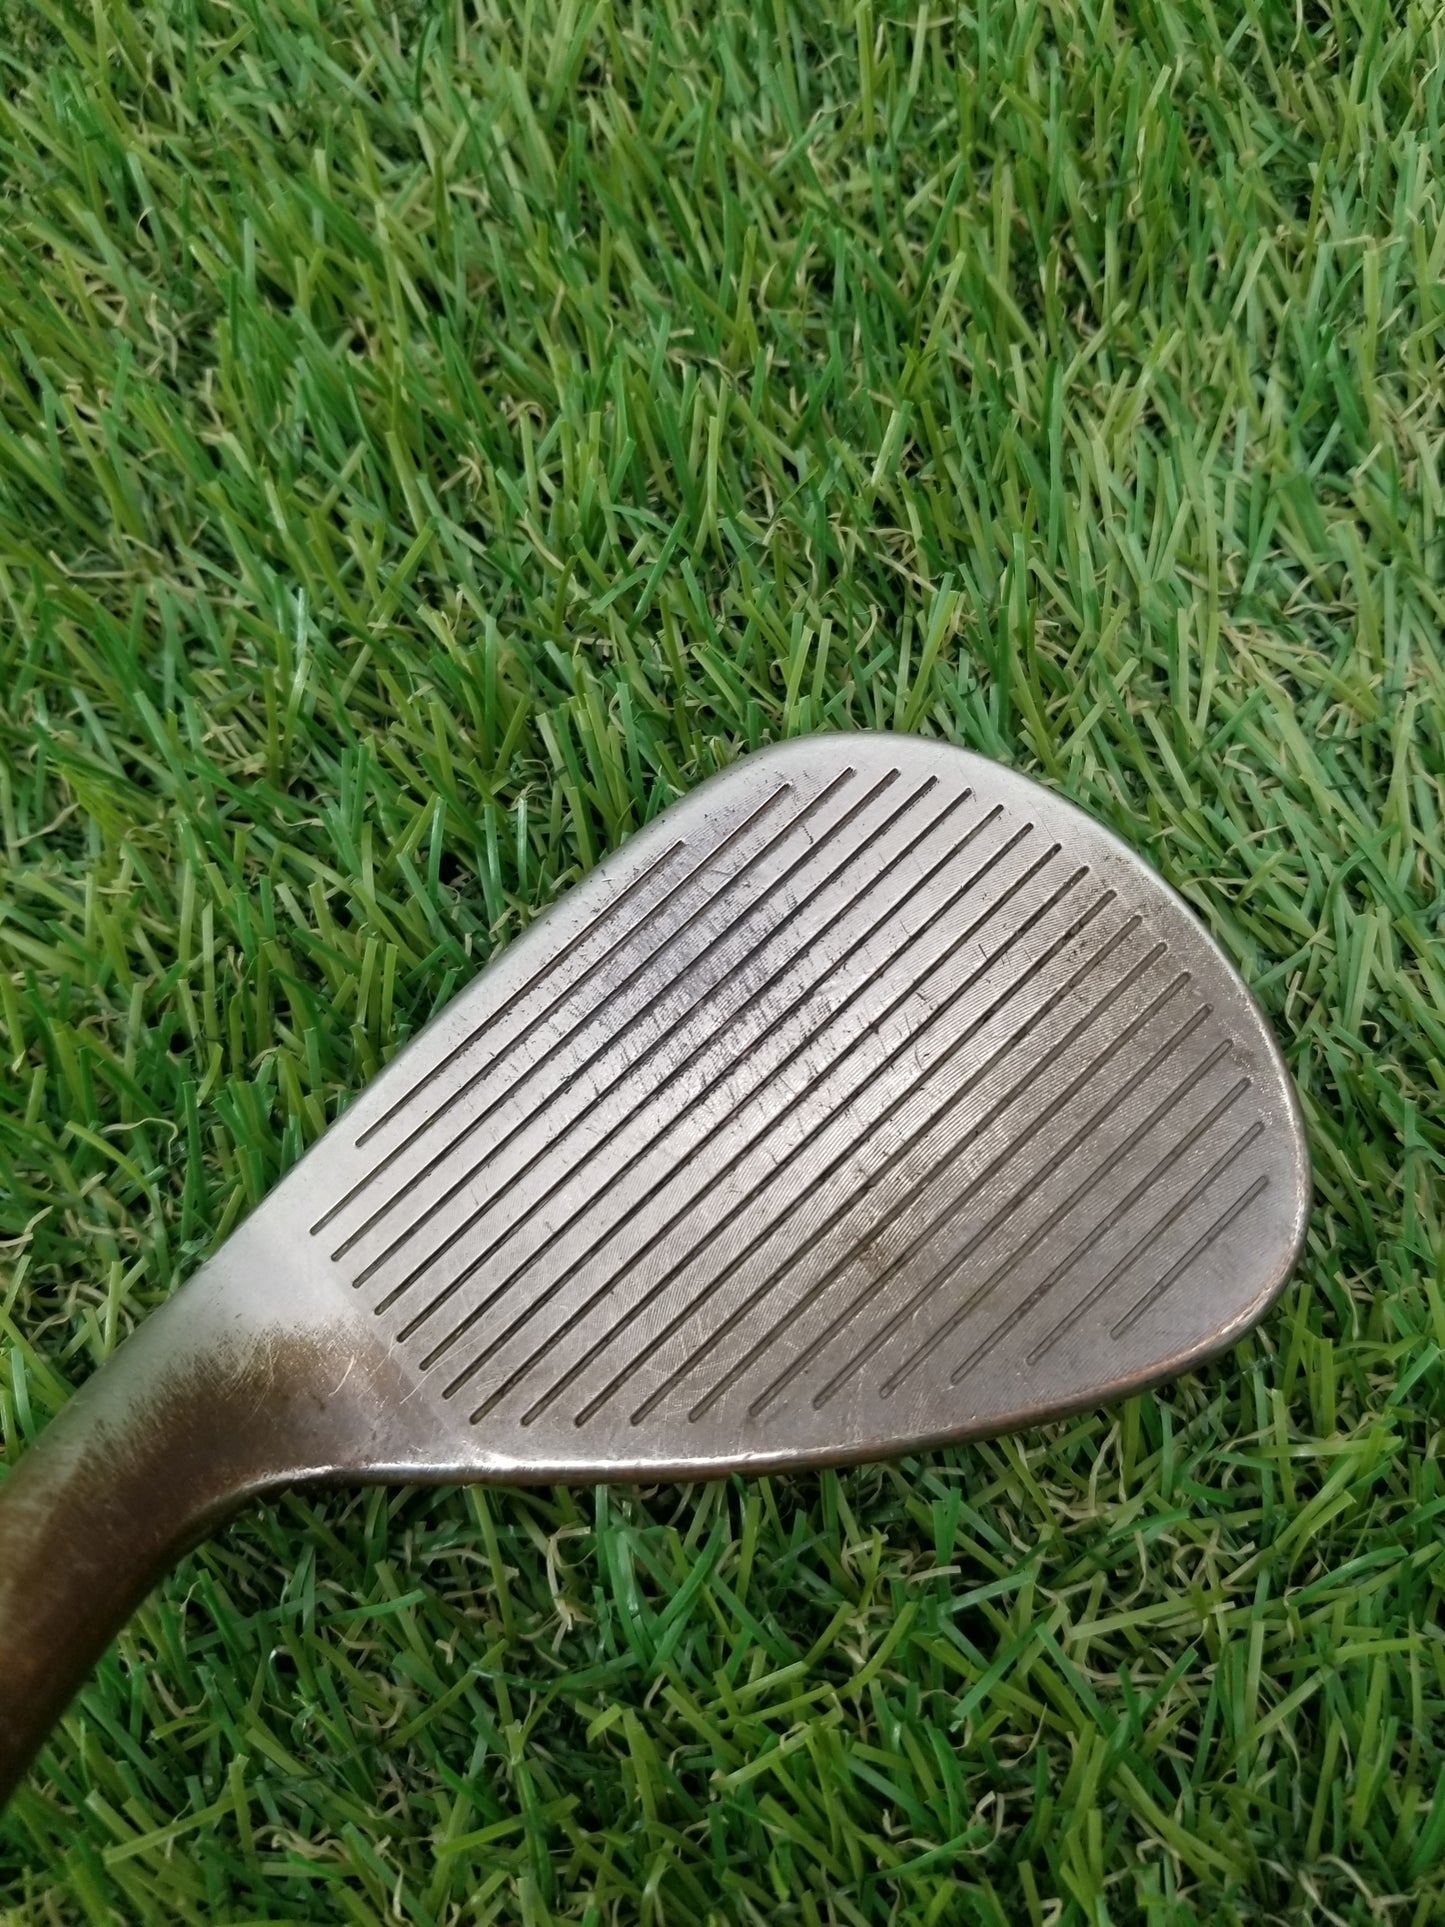 2018 TAYLORMADE MILLED GRIND HITOE WEDGE 56*/10 STIFF DYNAMIC GOLD S300 TI FAIR